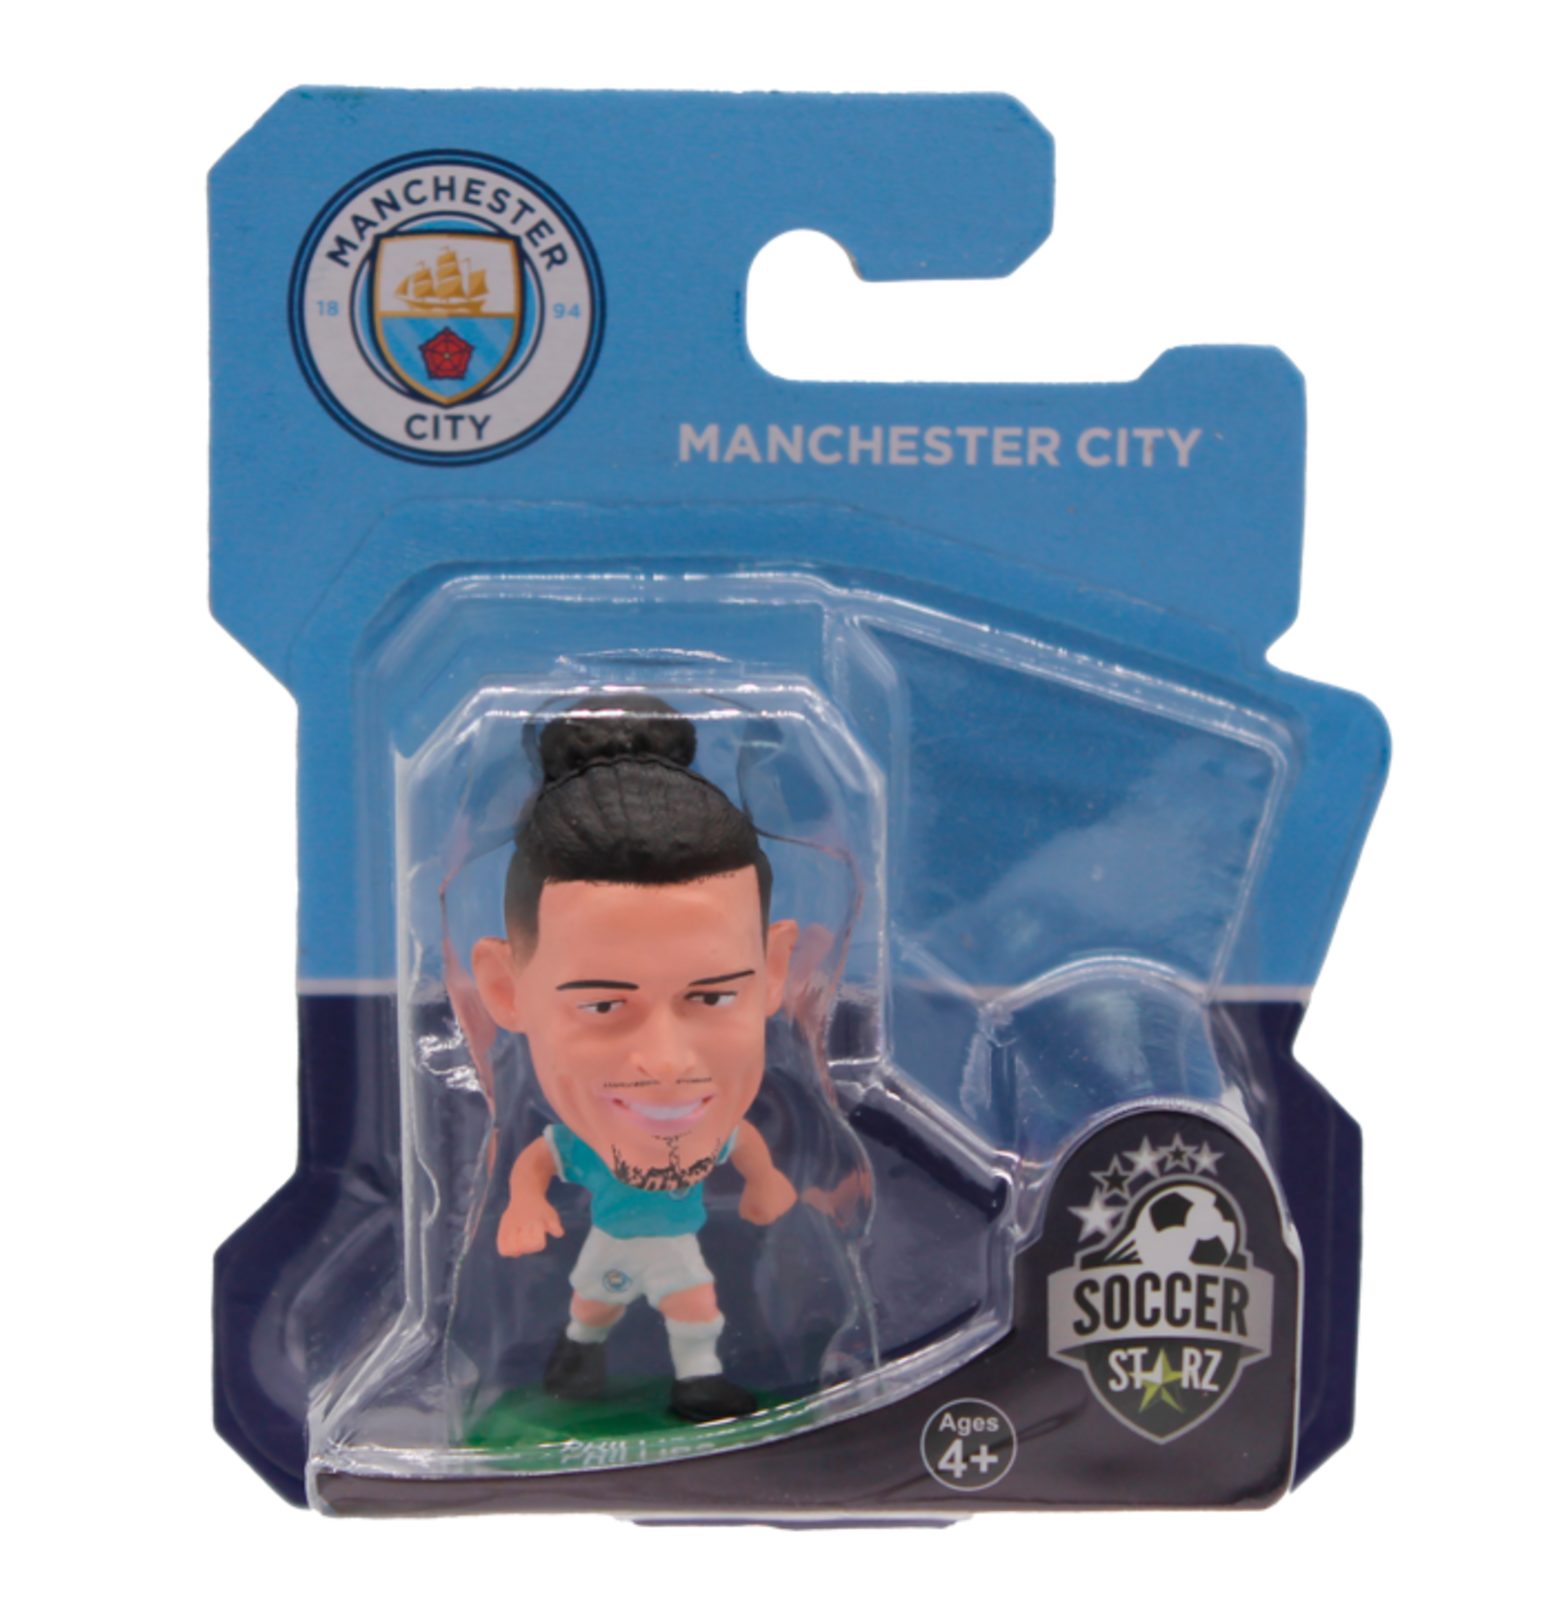 SoccerStarz Man Utd Chris Smalling - Home Kit - Man Utd Chris Smalling -  Home Kit . Buy Chris toys in India. shop for SoccerStarz products in India.  Toys for 4 - 15 Years Kids.